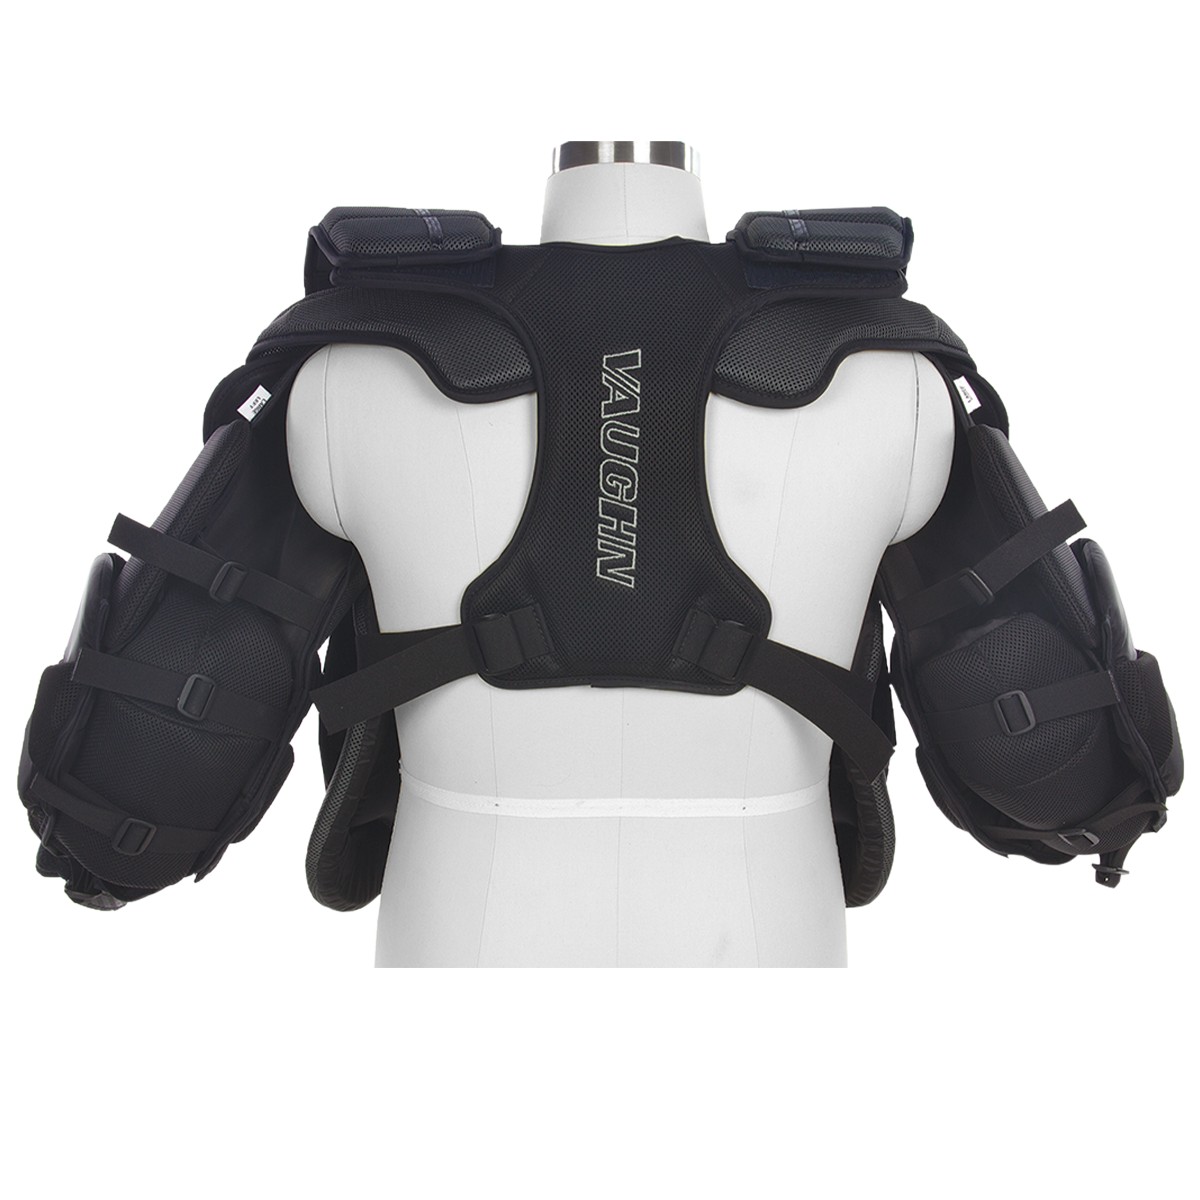 Hockey Elbow Pads - Buy Protective Elbow Pads Online - Majer